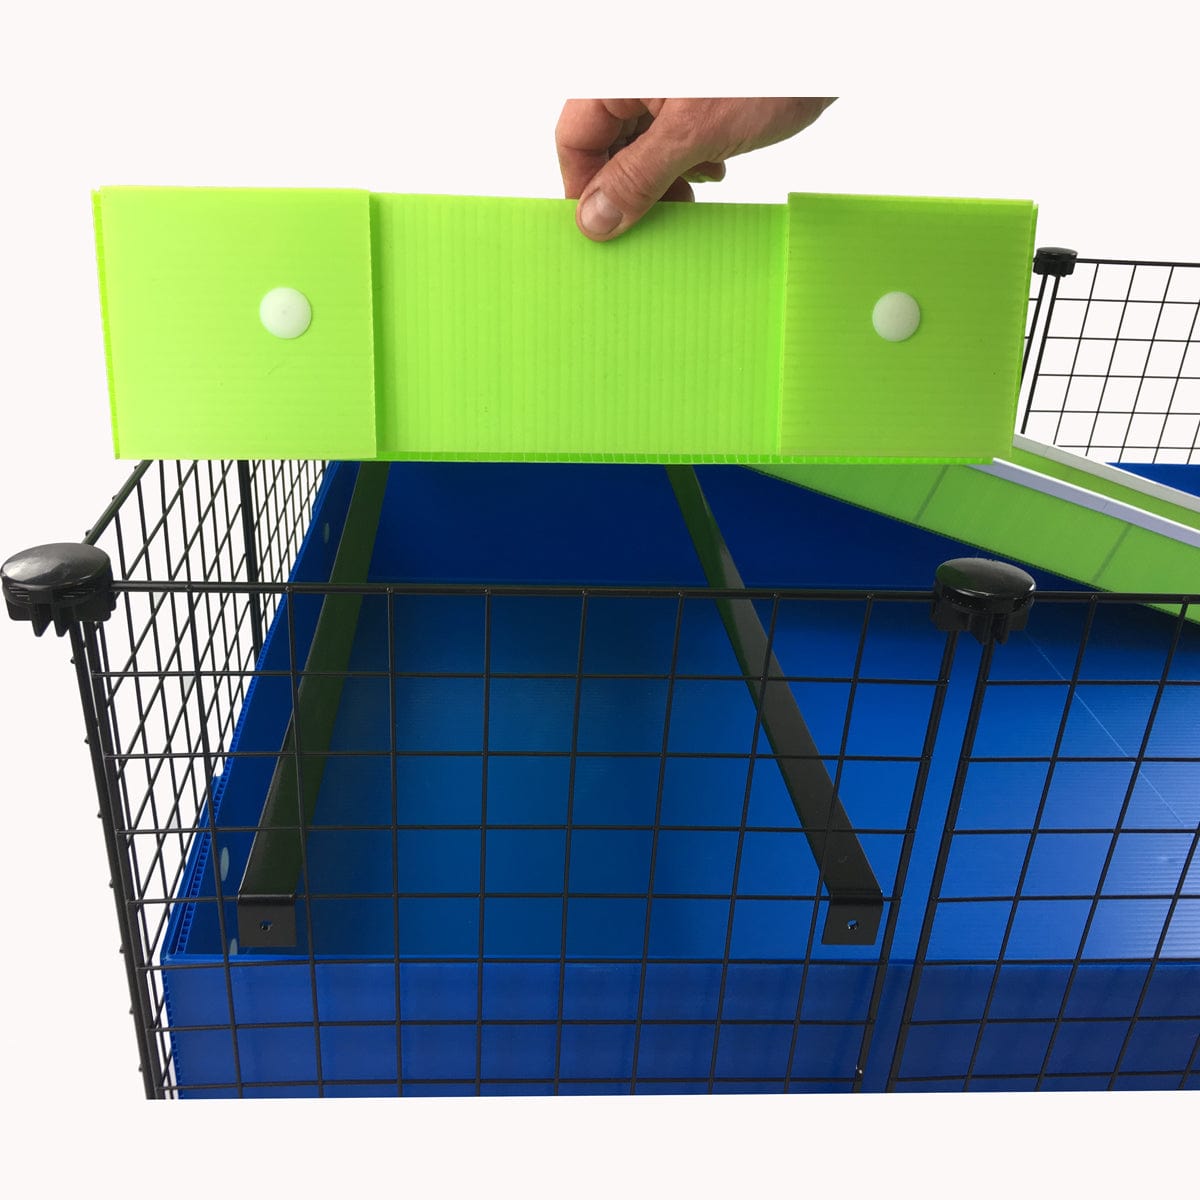 Lime piggy patio with ramp and support bars for C&C guinea pig cages